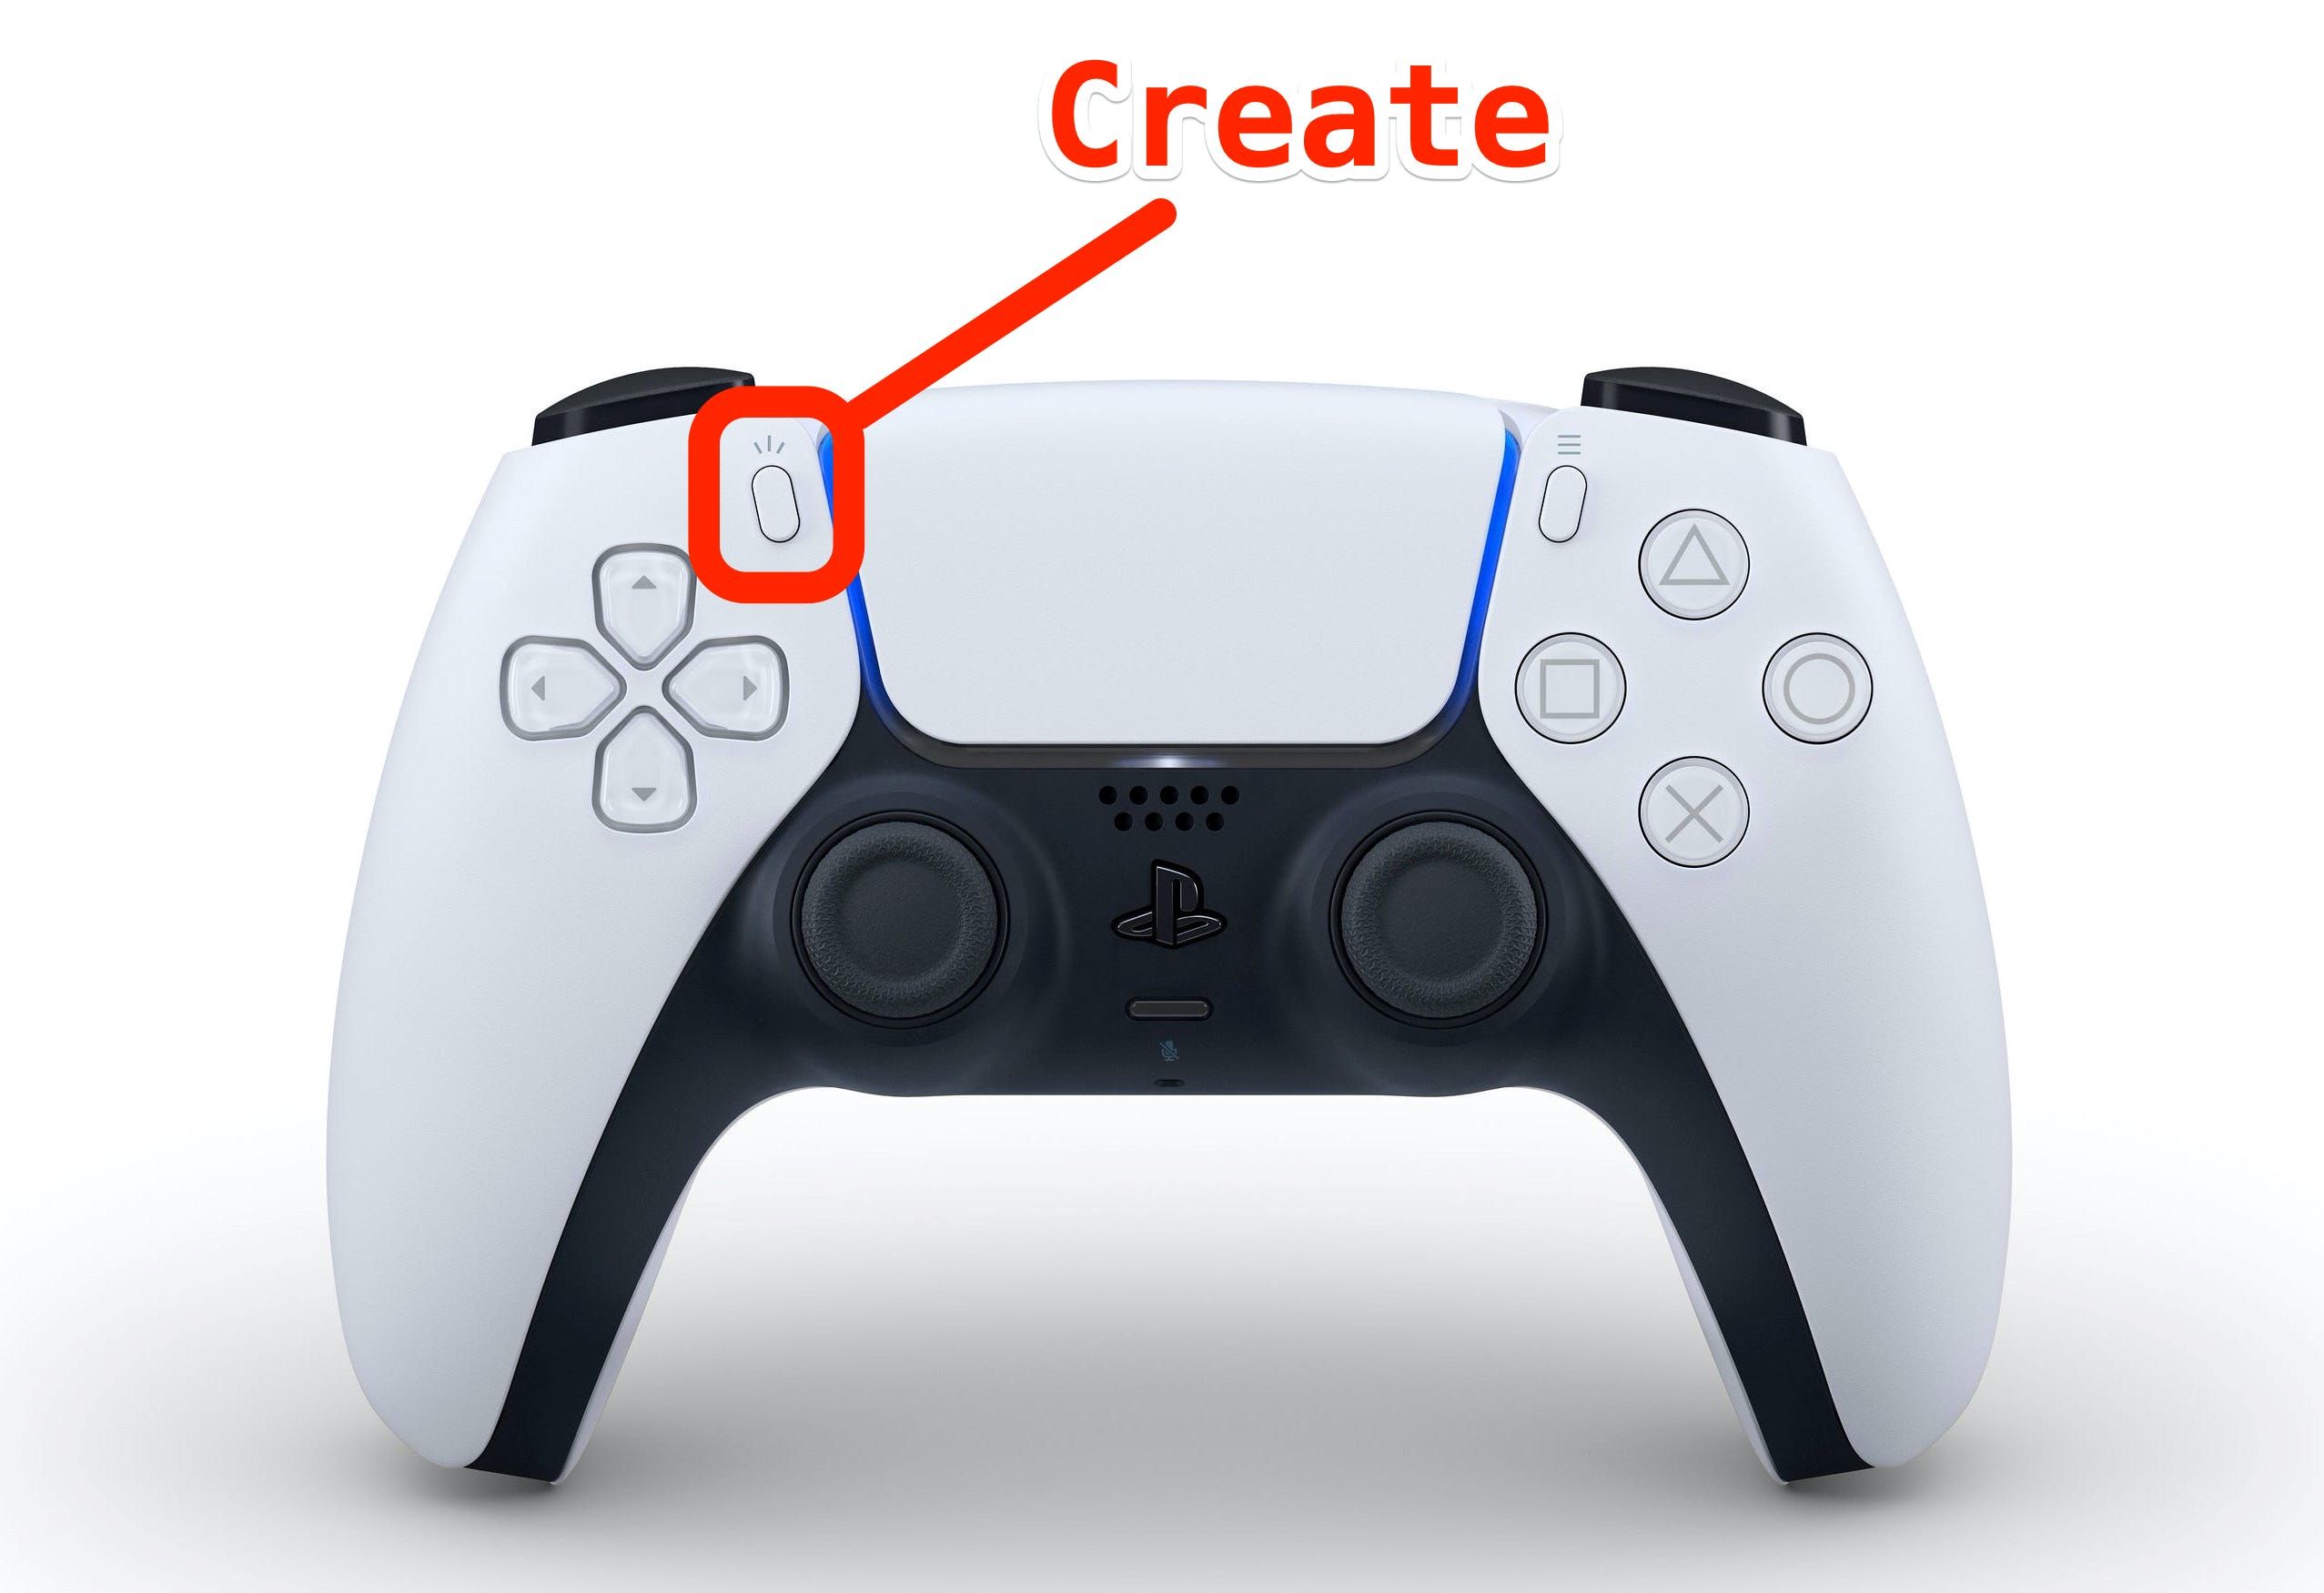 What Is The Create Button On PS5